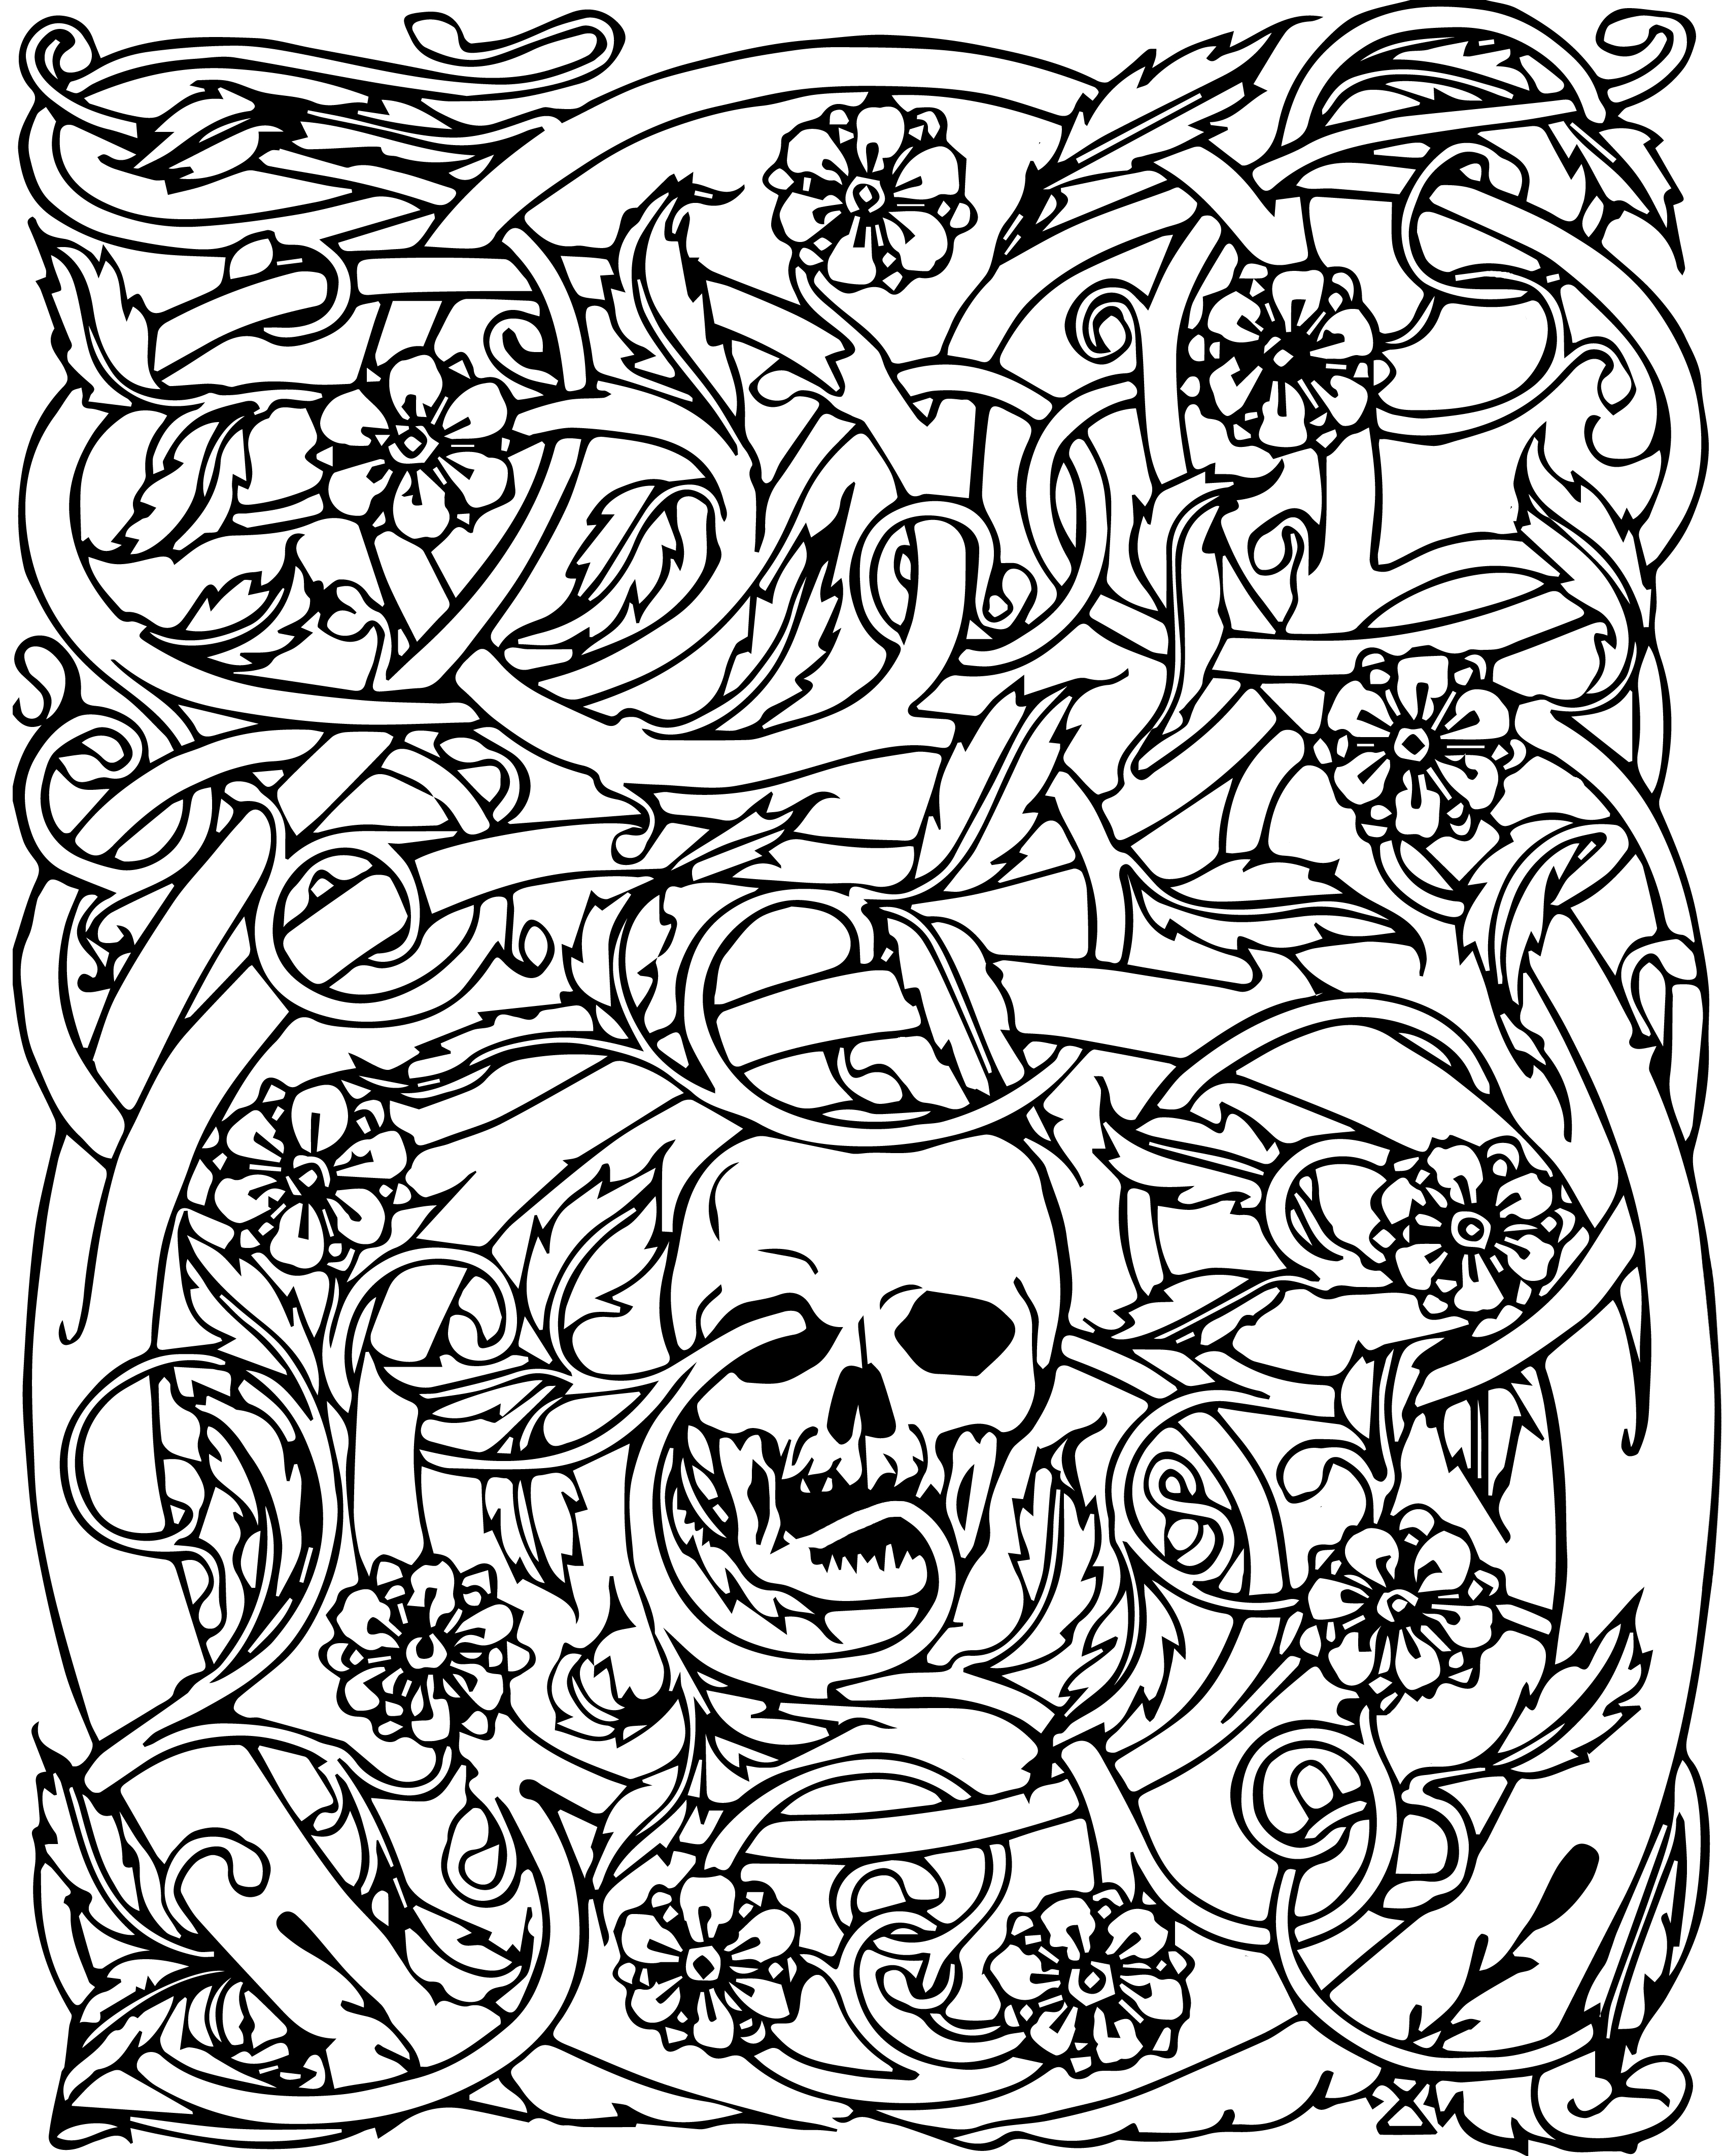 Get Scary Halloween Coloring Pages For Adults Background COLORIST